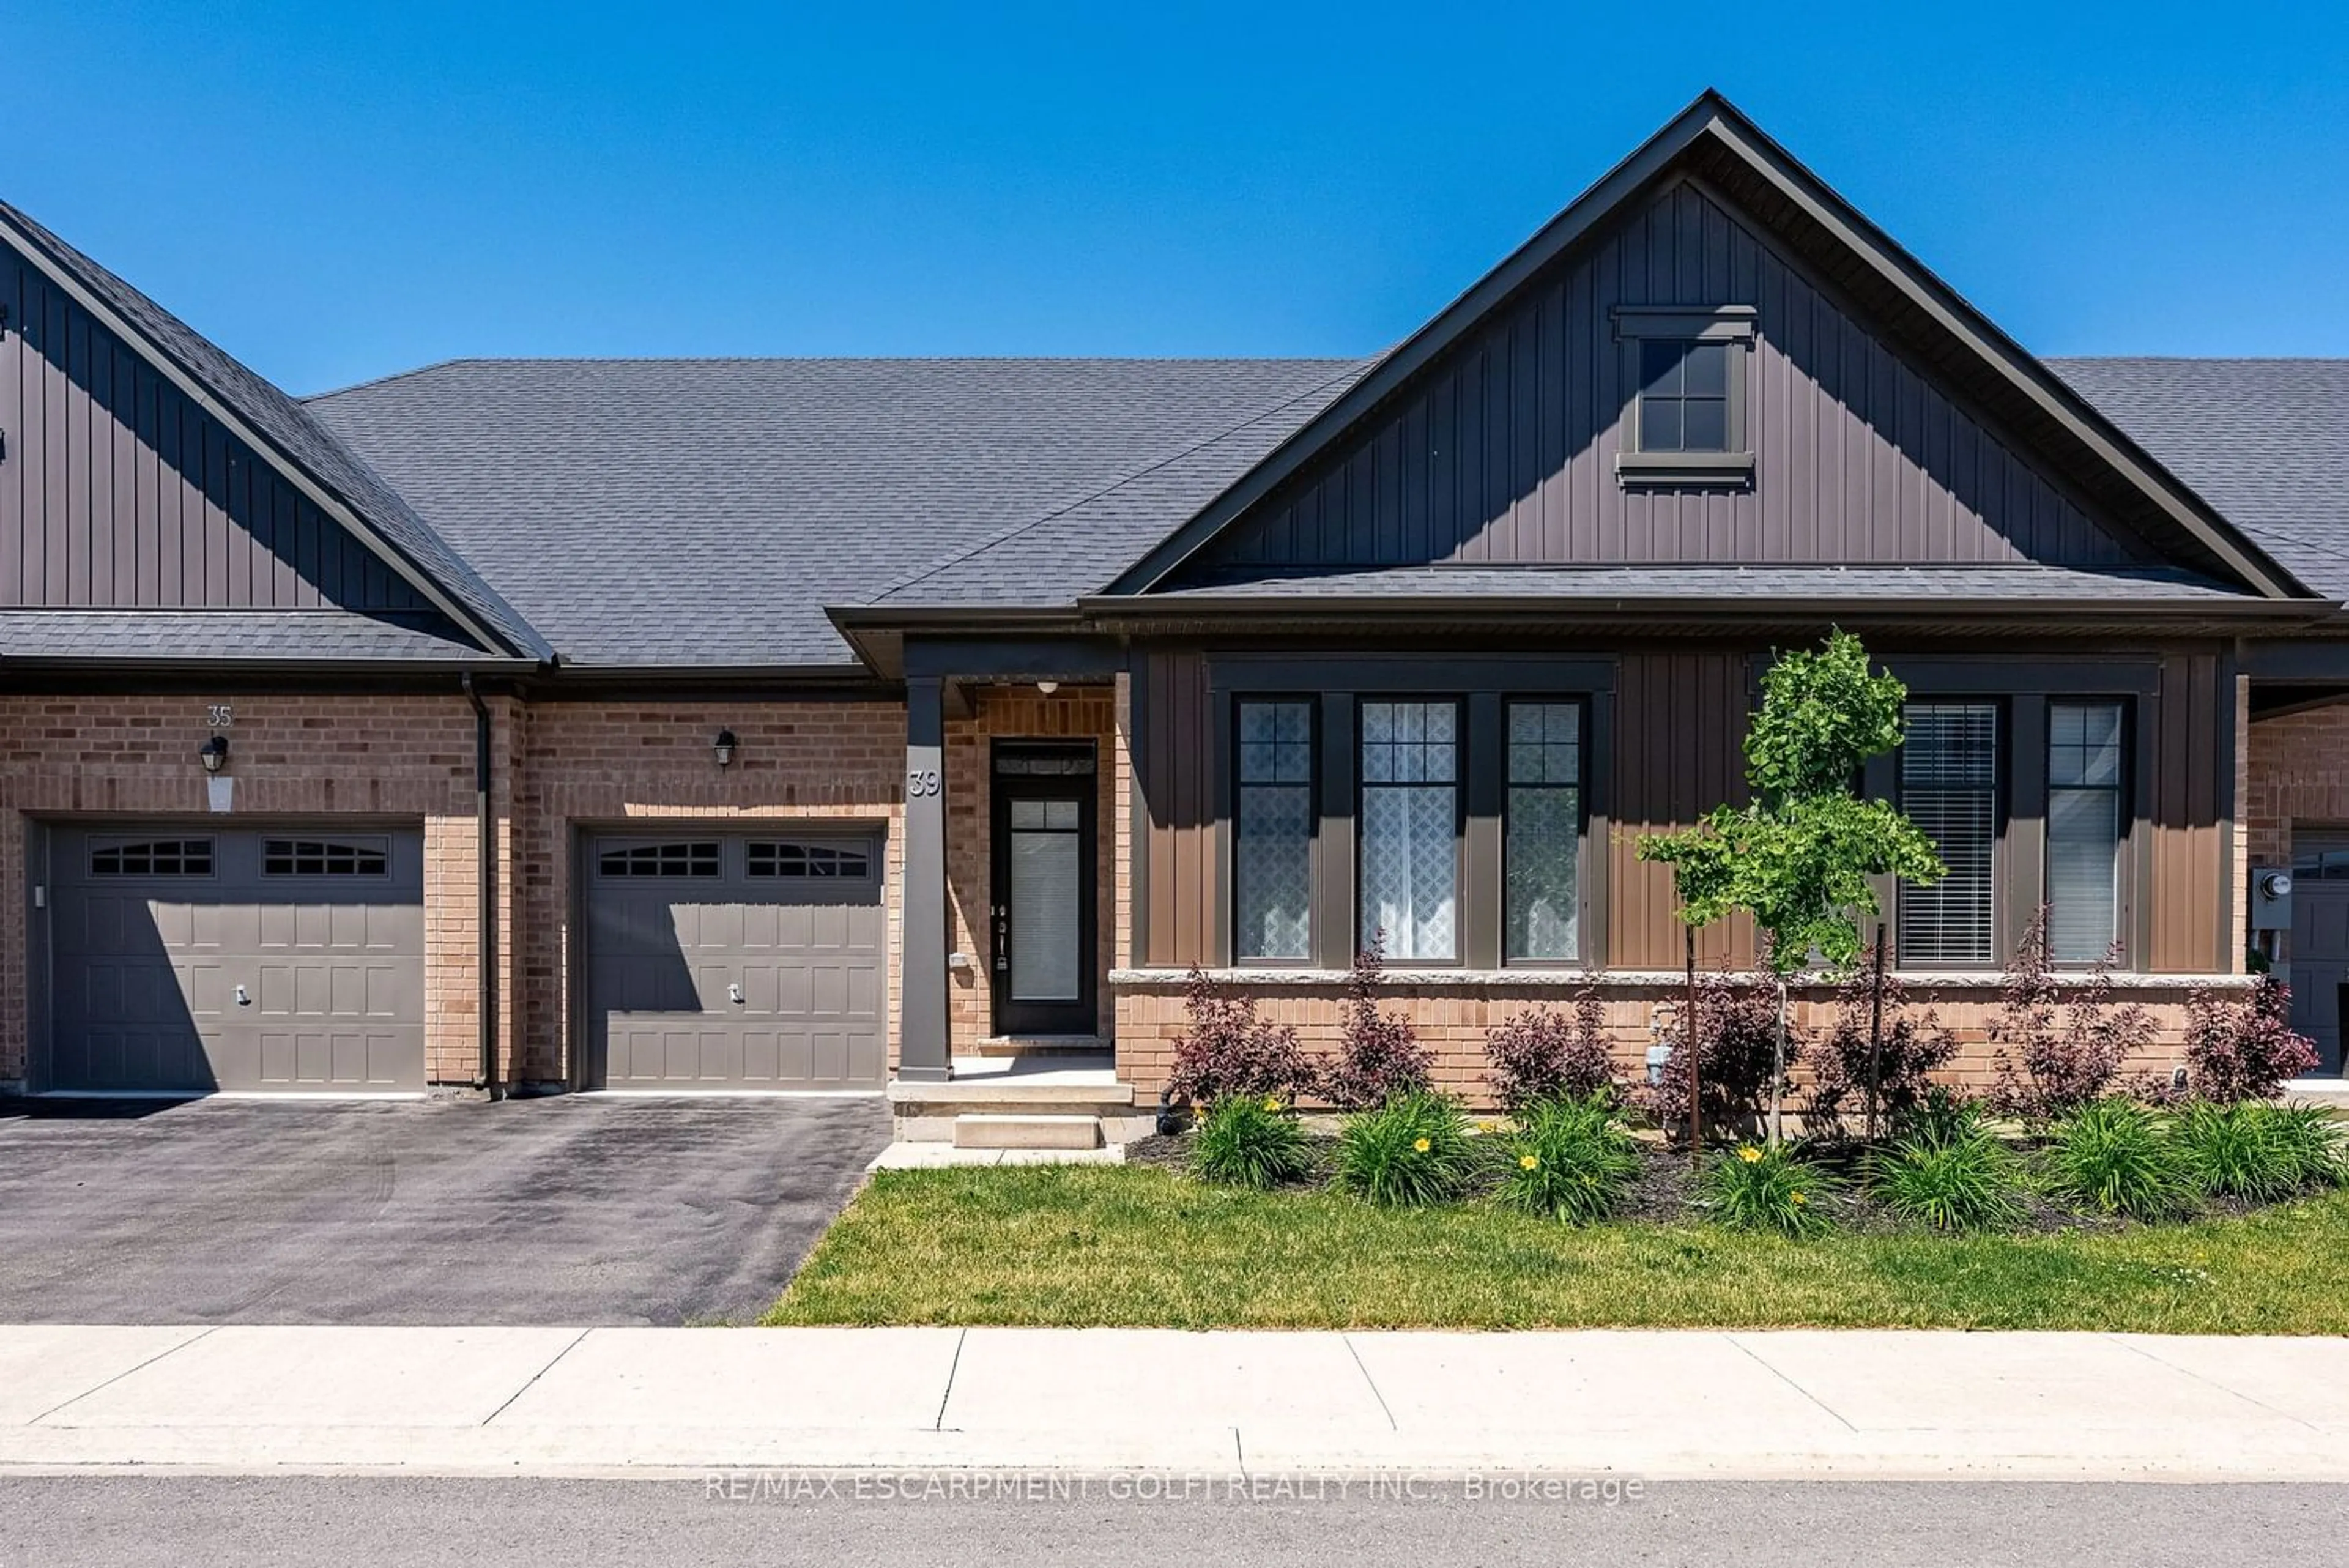 Home with brick exterior material for 39 Cosmopolitan Common, St. Catharines Ontario L2M 0A6